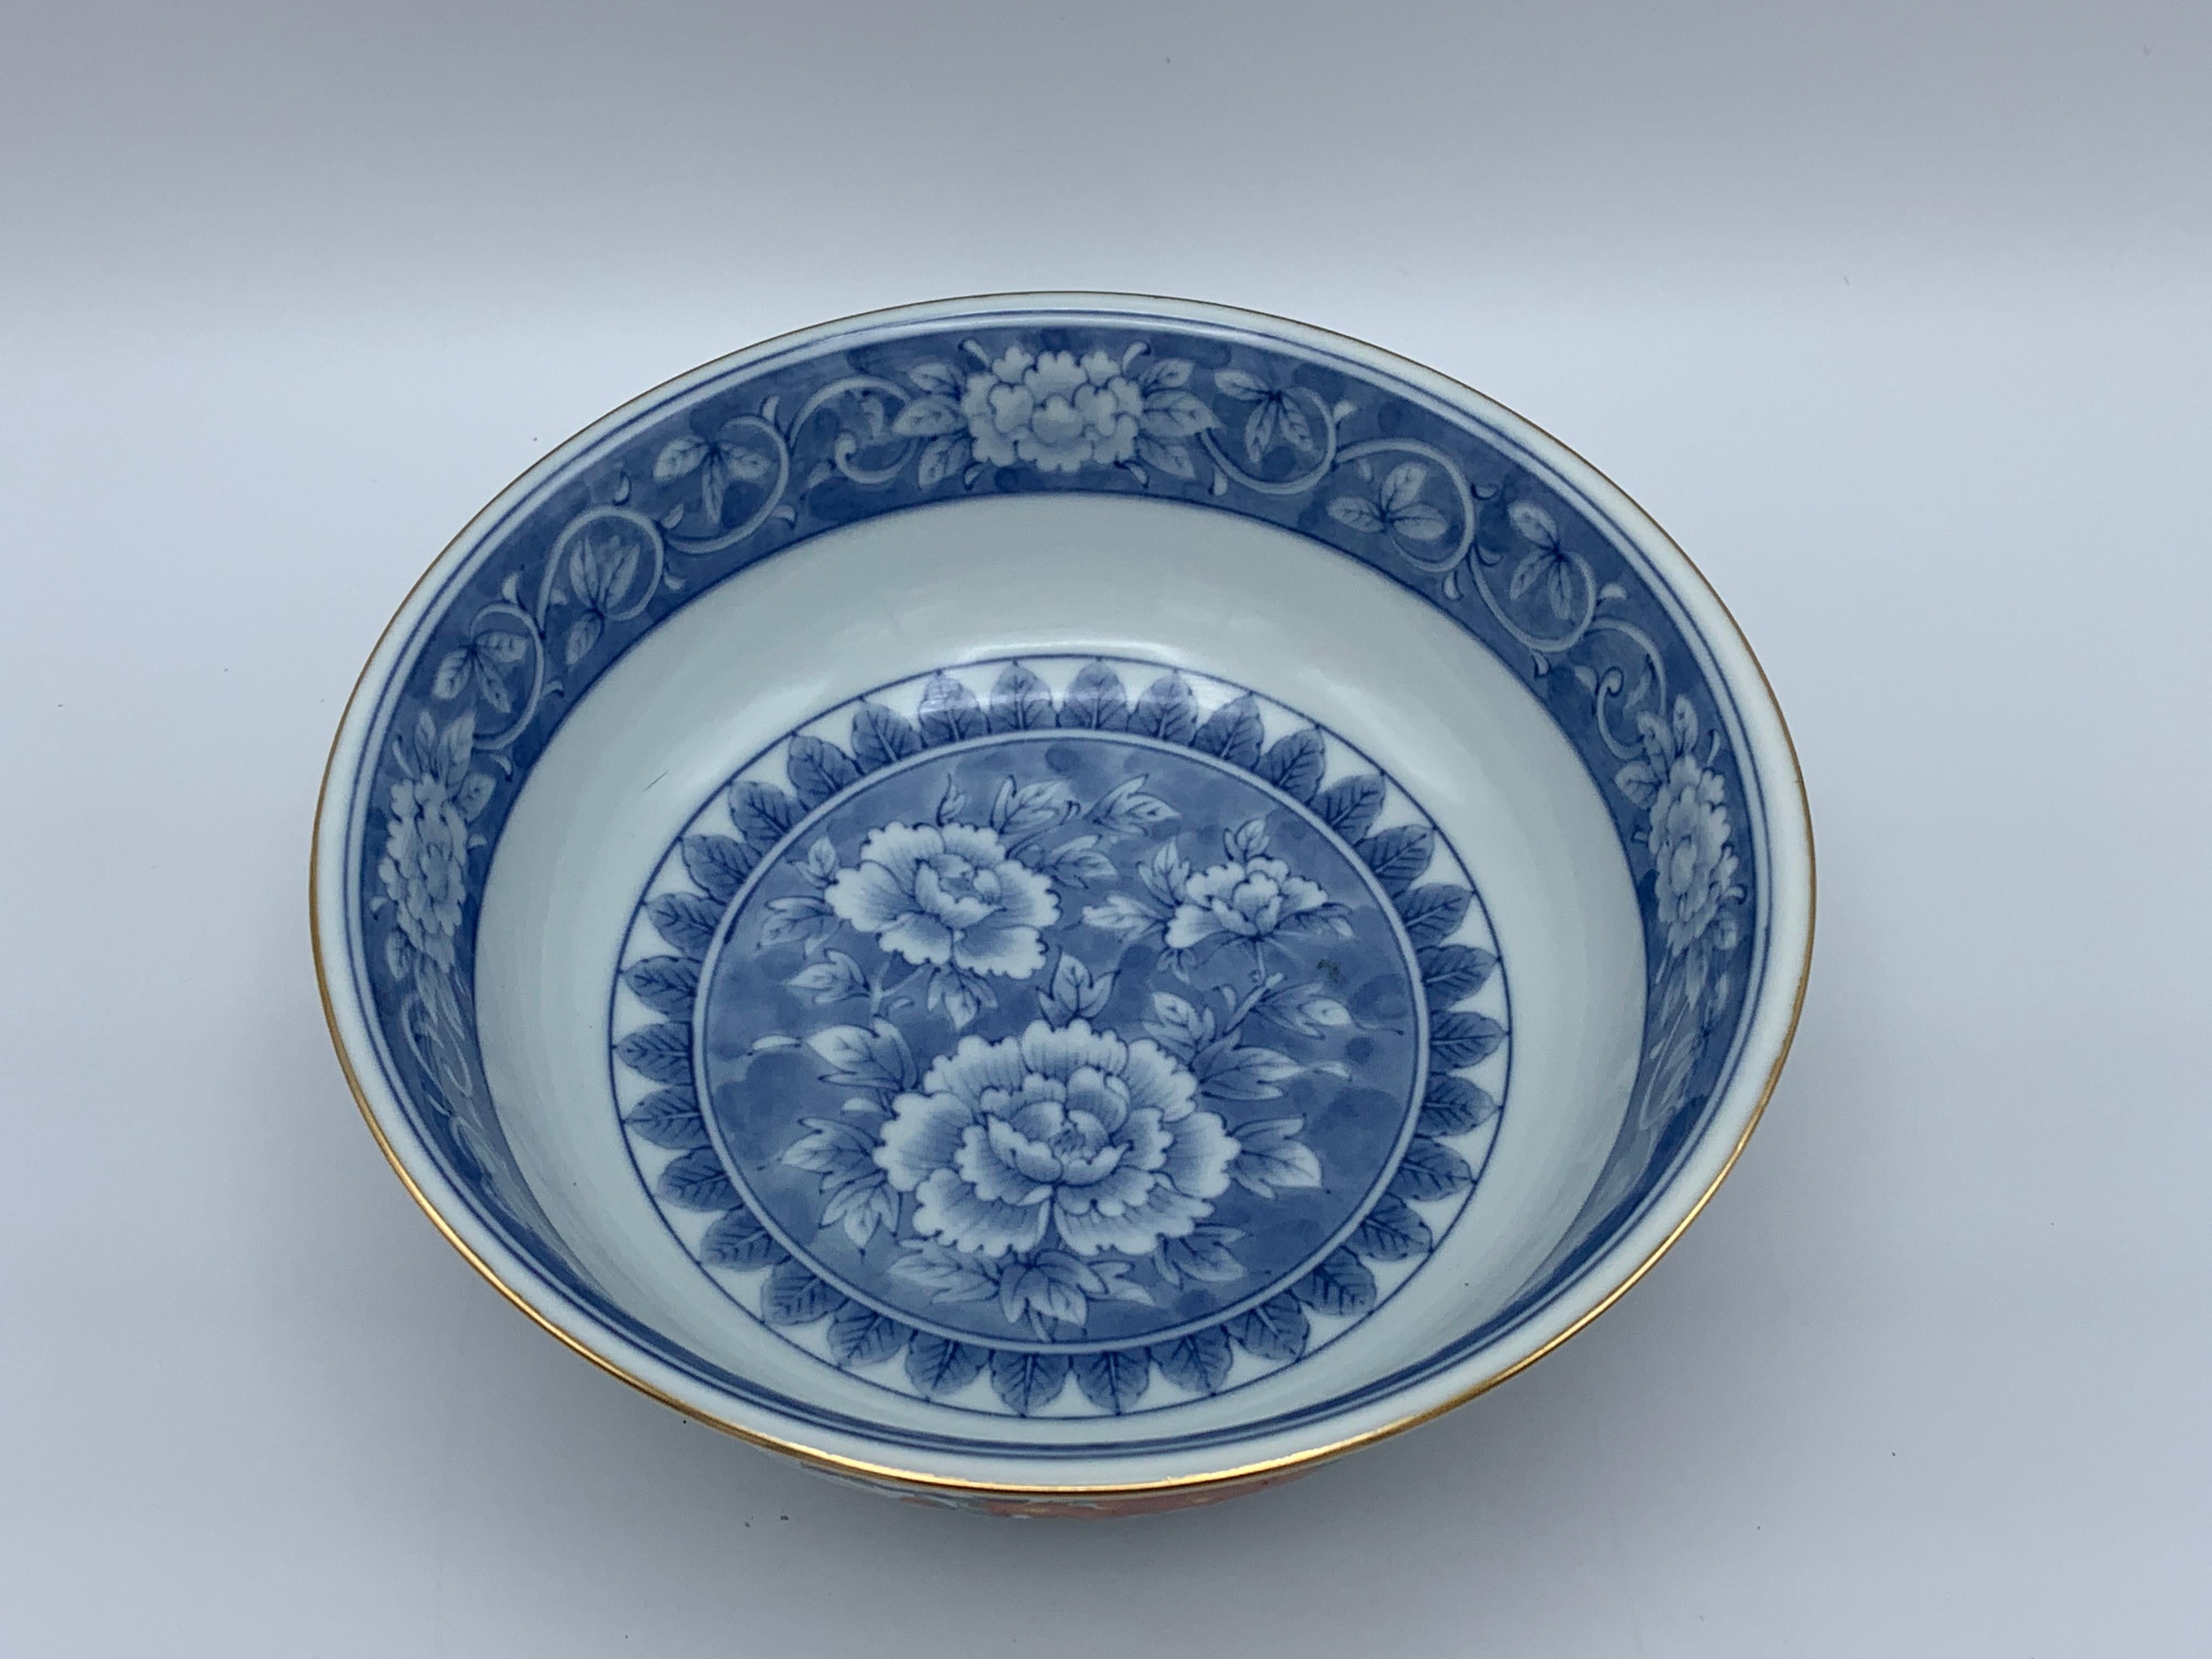 Offered is a gorgeous, 1970s Tiffany & Co. chinoiserie catchall bowl, a fresh take on the Classic antique Imari ware. The piece has a beautiful, blue and white peony background background with ornate orange florals, complimented by a gold rim along